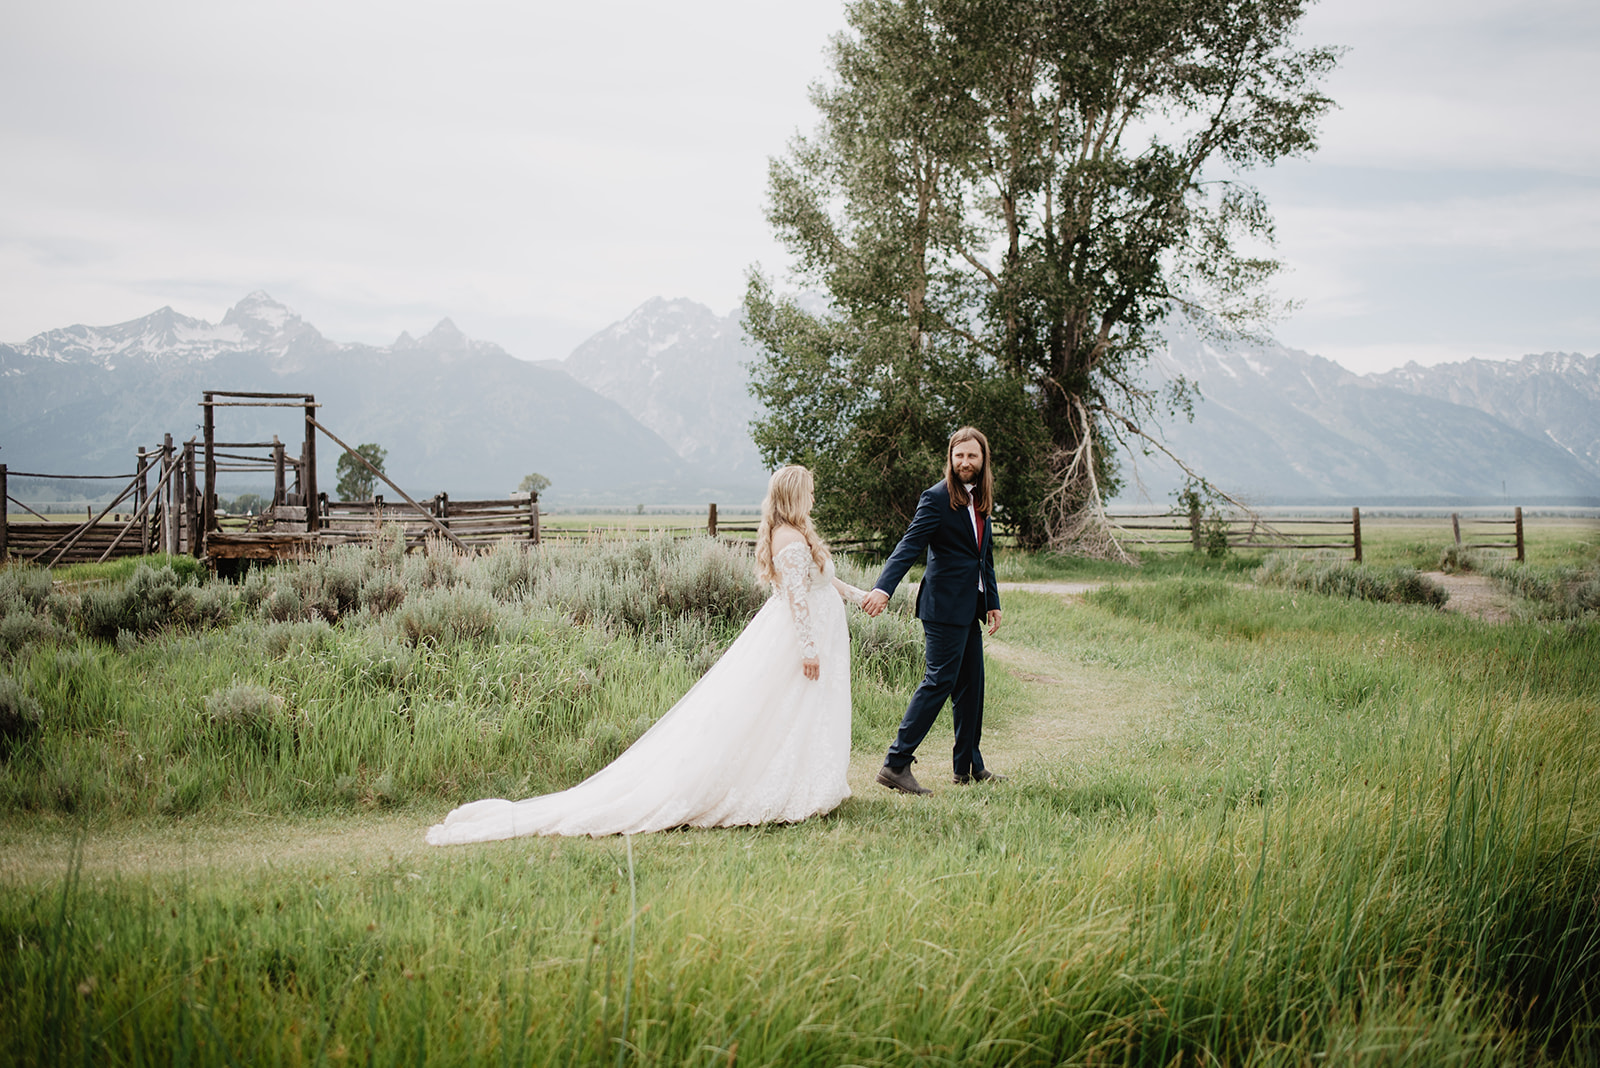 outdoor weddin gin Jackson Hole with groom holding brides hand as he leads her down a trail